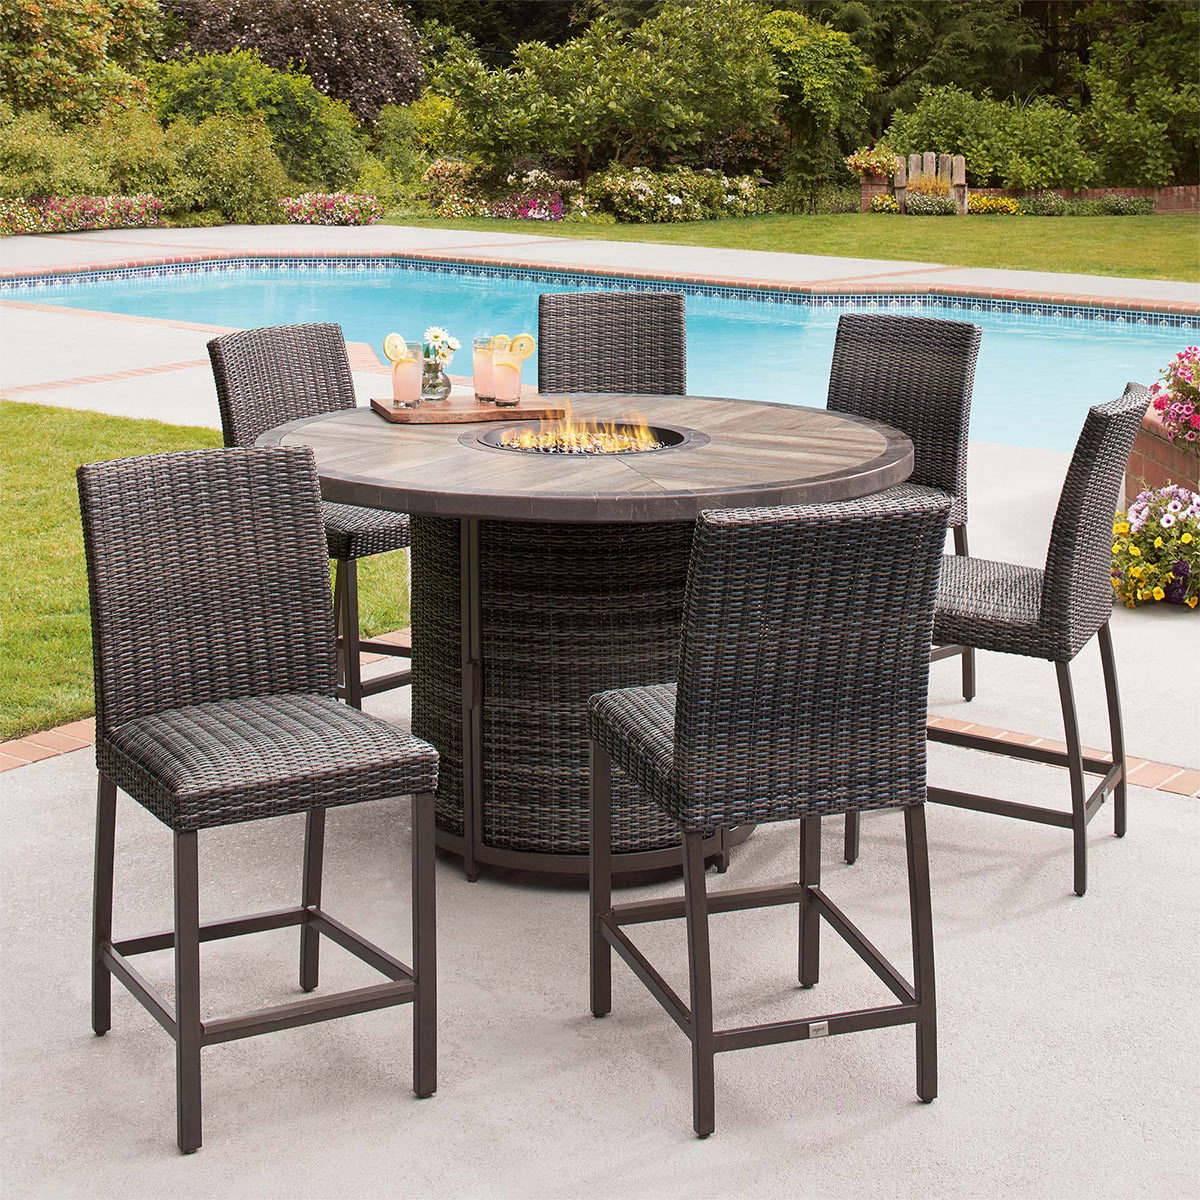 Bar Height Fire Pit Table Costco : 20 Bar Height Patio Furniture Costco ...